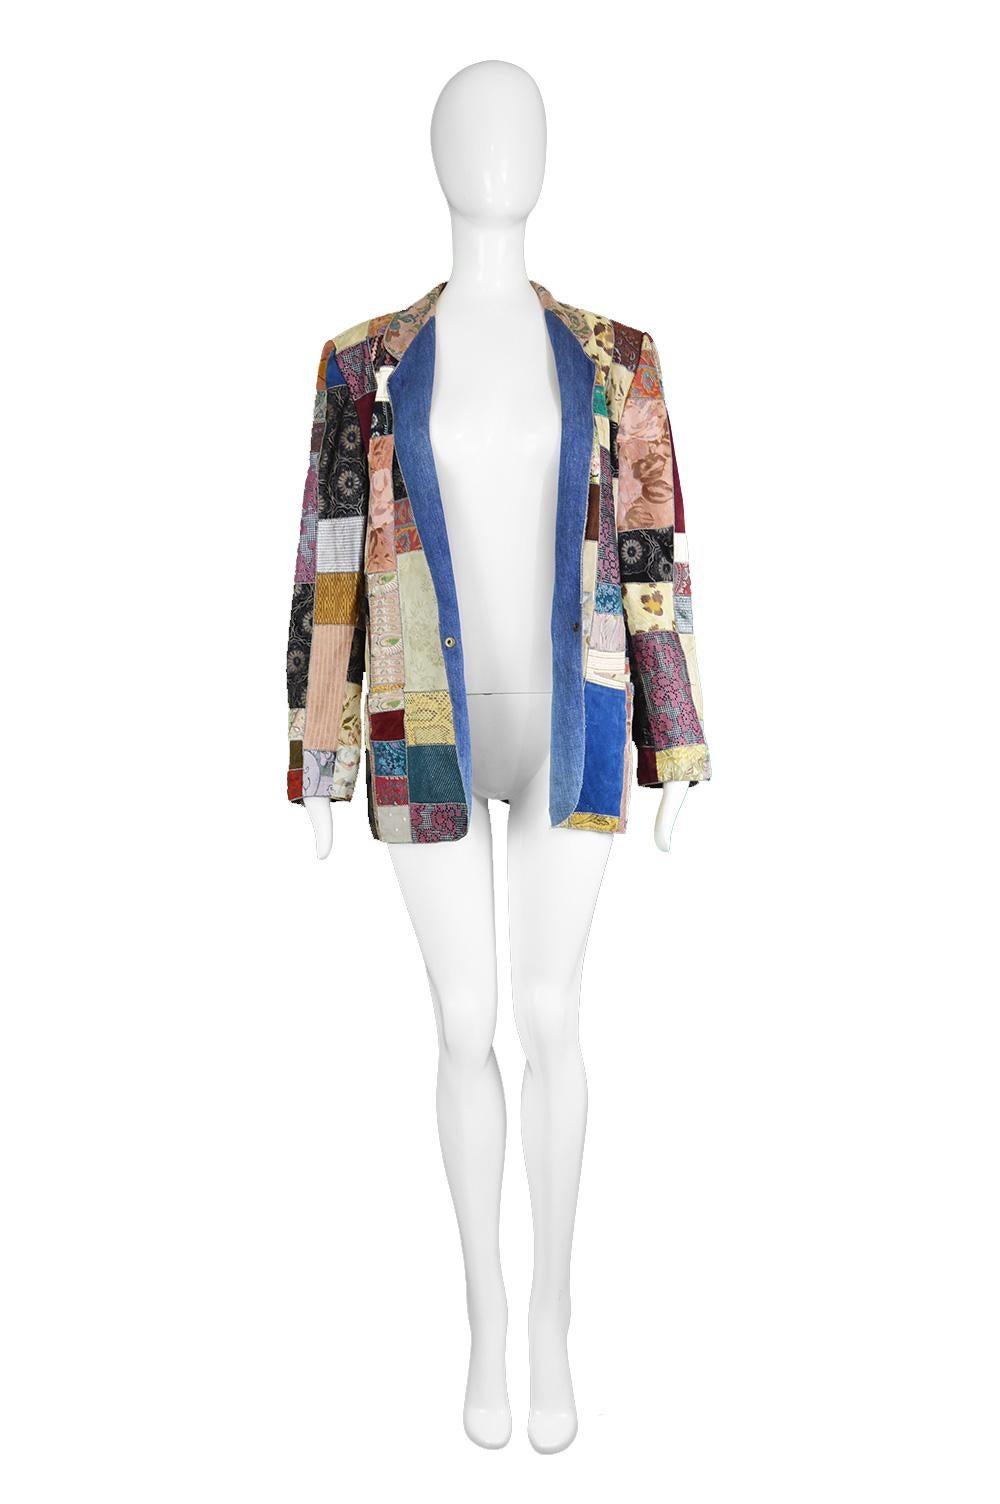 Roberto Cavalli Vintage Printed Suede, Leather & Denim Patchwork Jacket, 1980s

Size: Marked M. Please check measurements. 
Bust - 40” / 101cm (allow a couple of inches room for movement)
Waist - 38” / 96cm
Length (Shoulder to Hem) - 27” /